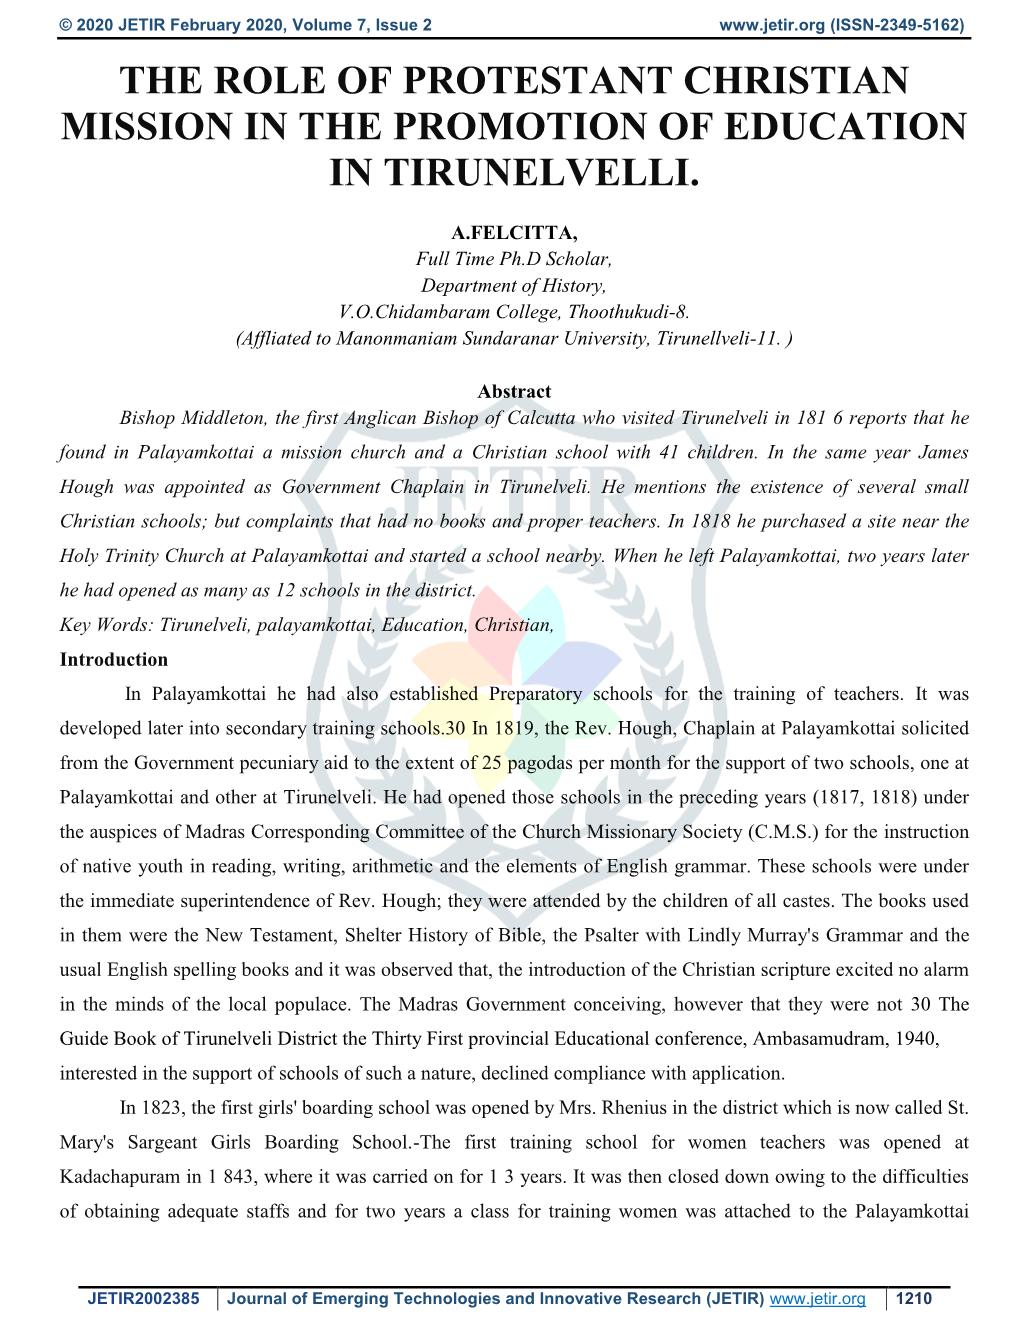 The Role of Protestant Christian Mission in the Promotion of Education in Tirunelvelli